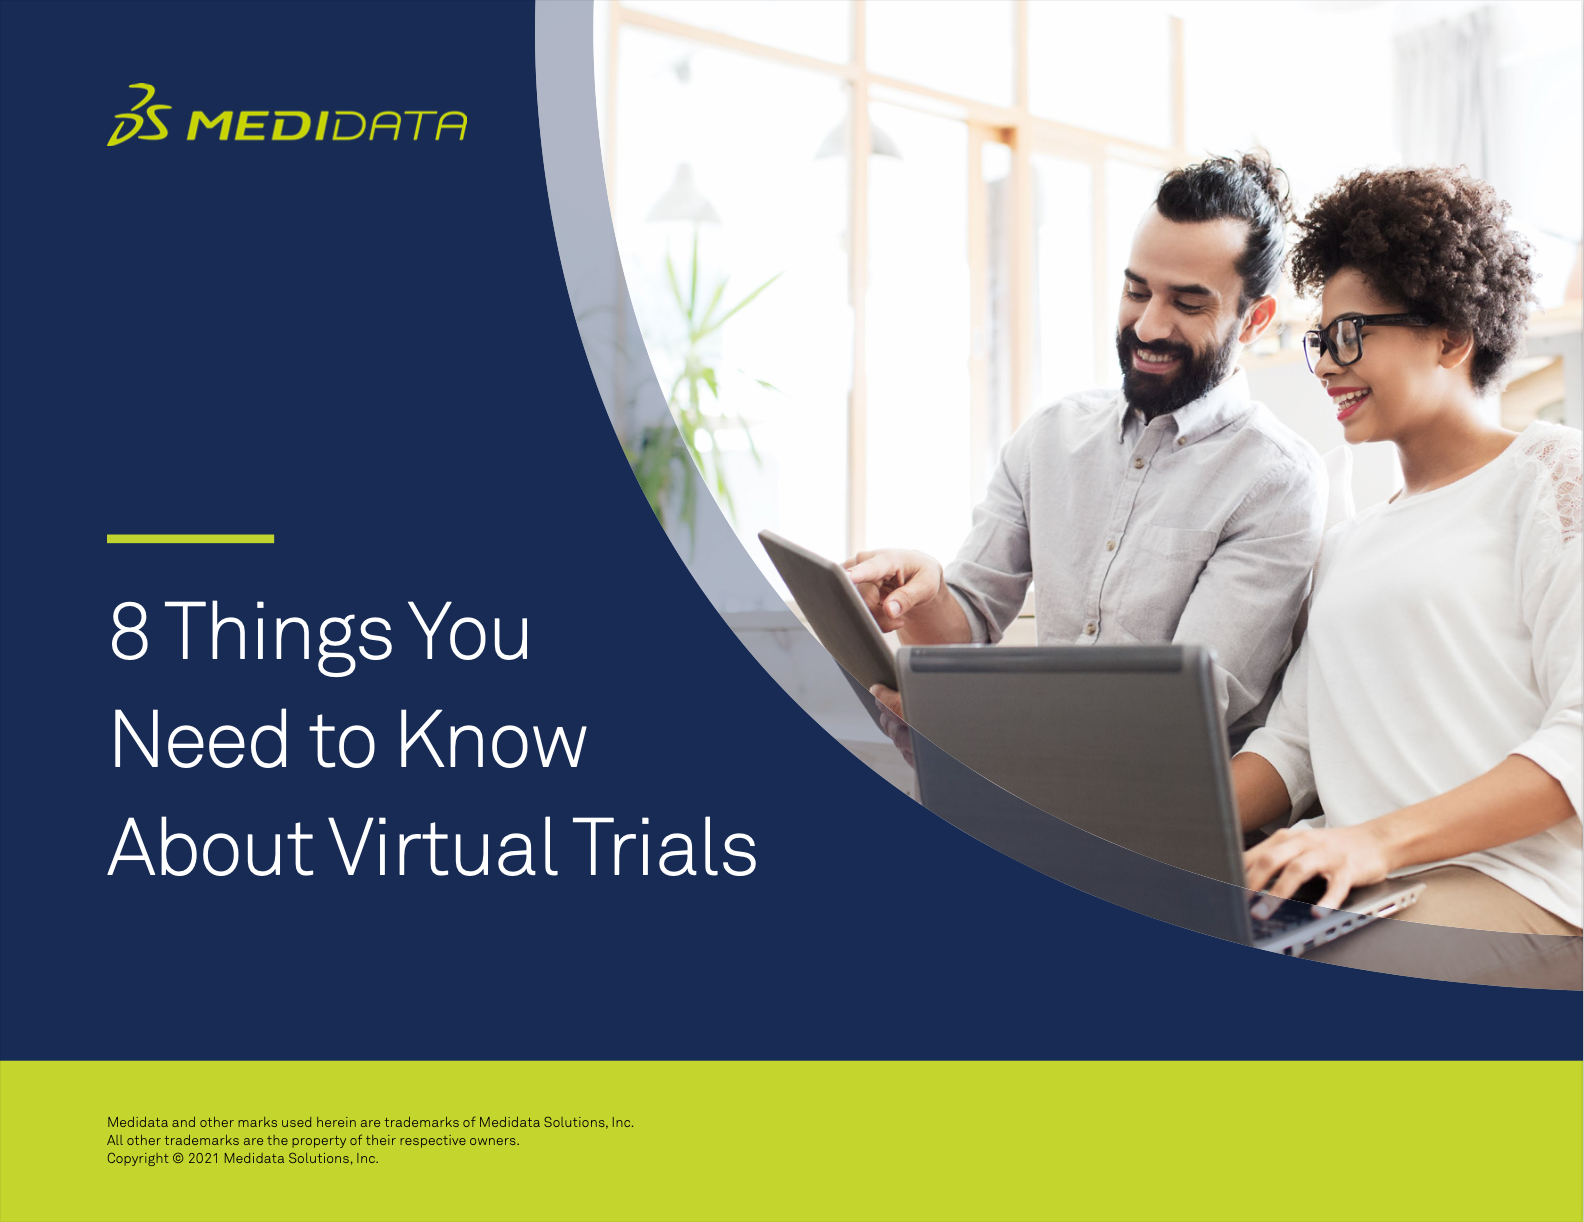 8 Things You Need to Know About Virtual Trials